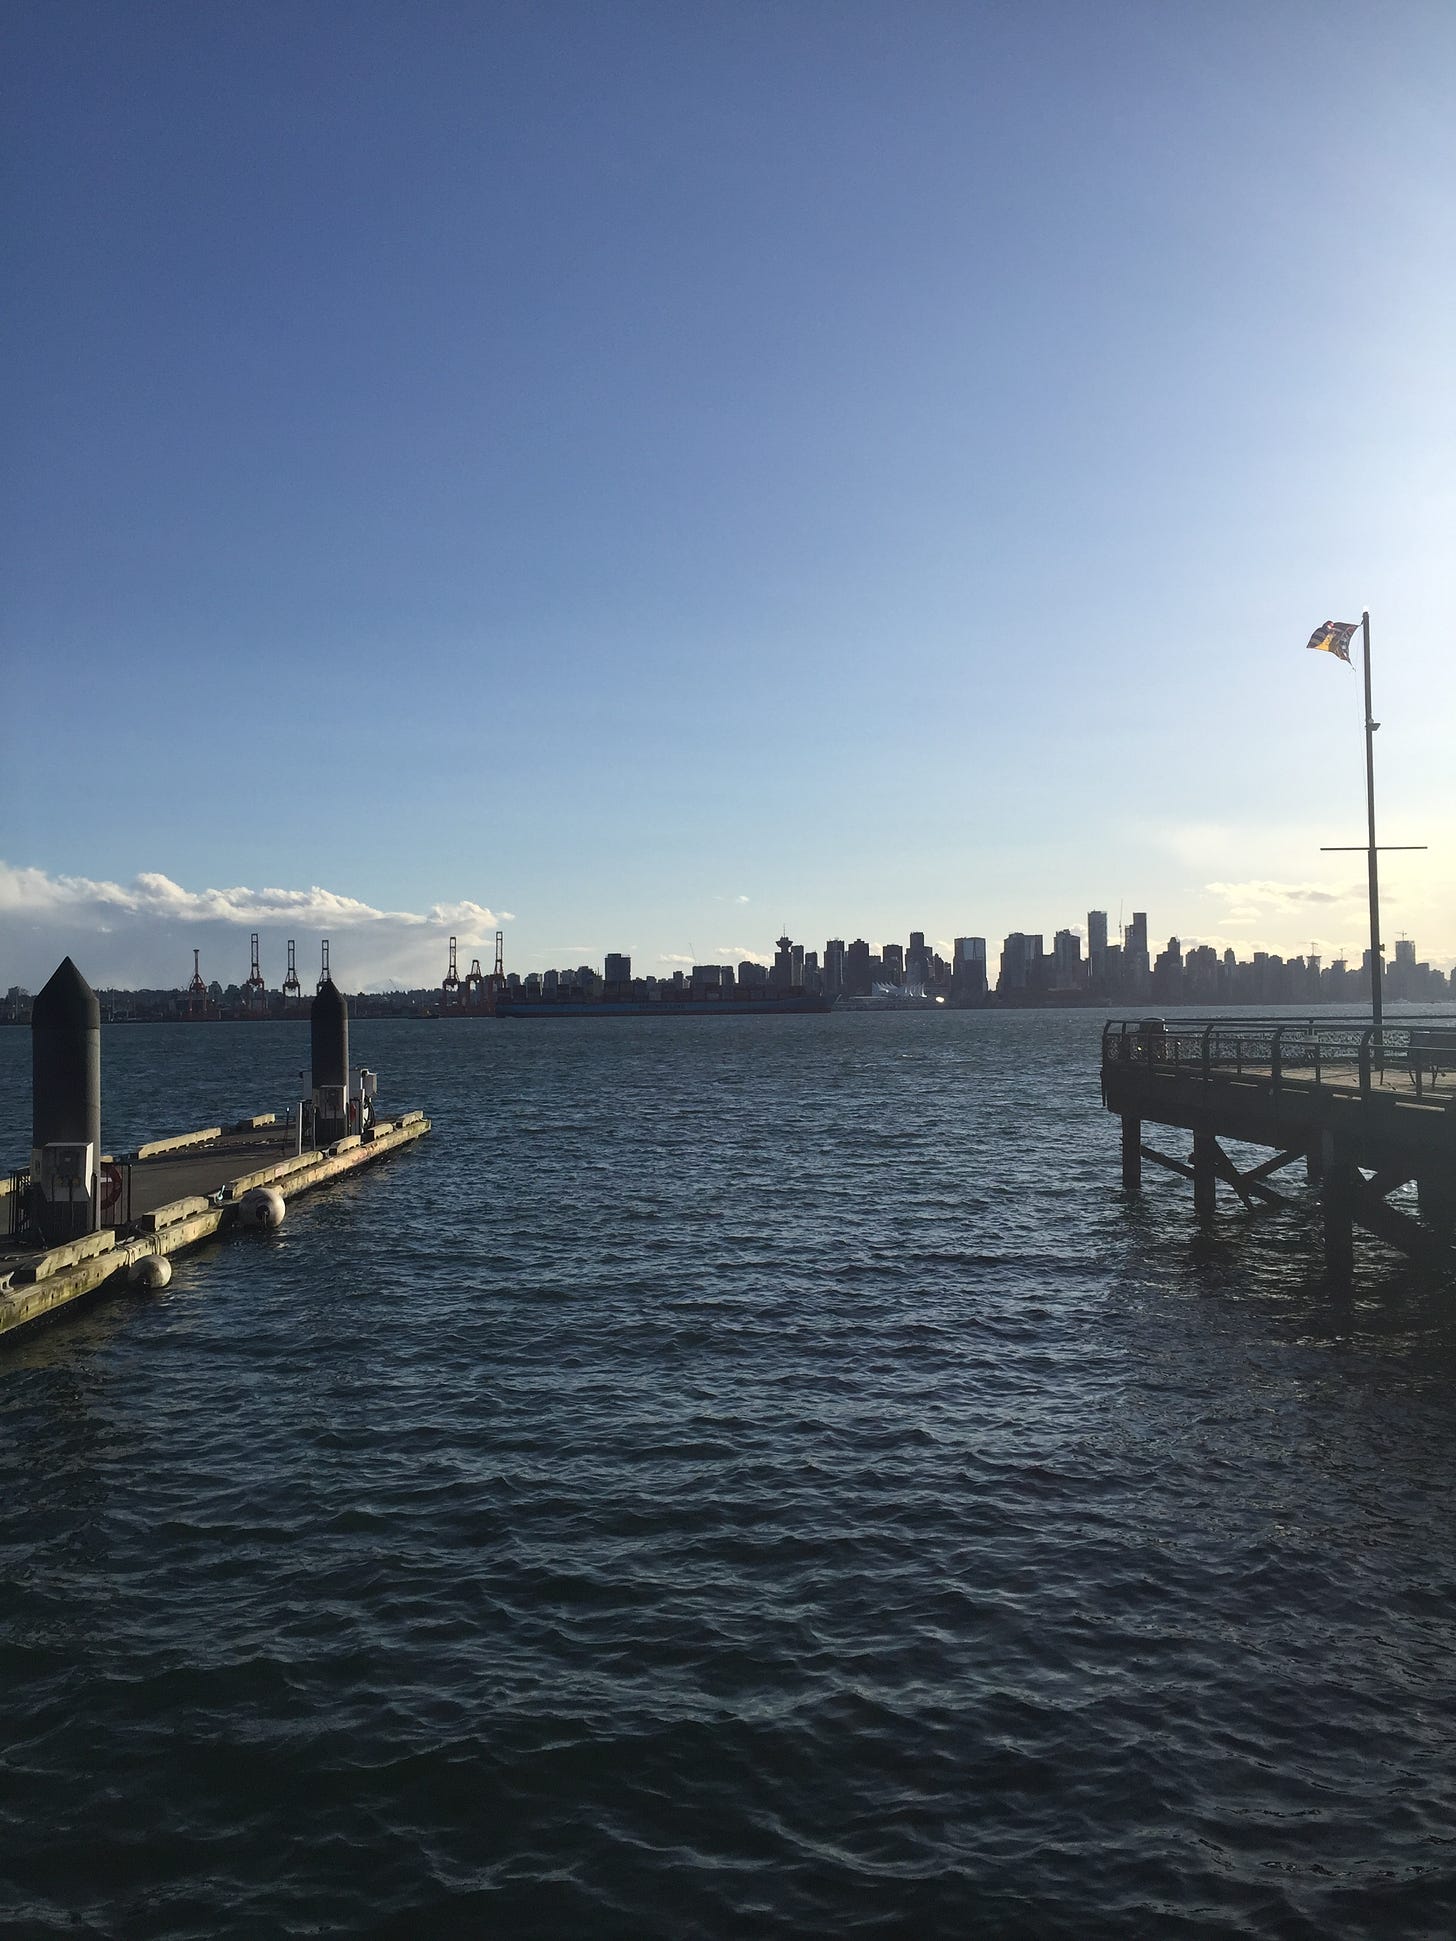 The Vancouver skyline, viewed across the water from the Shipyards area of Lonsdale. Corners of the pier are visible at either edge of the photo in the foreground.